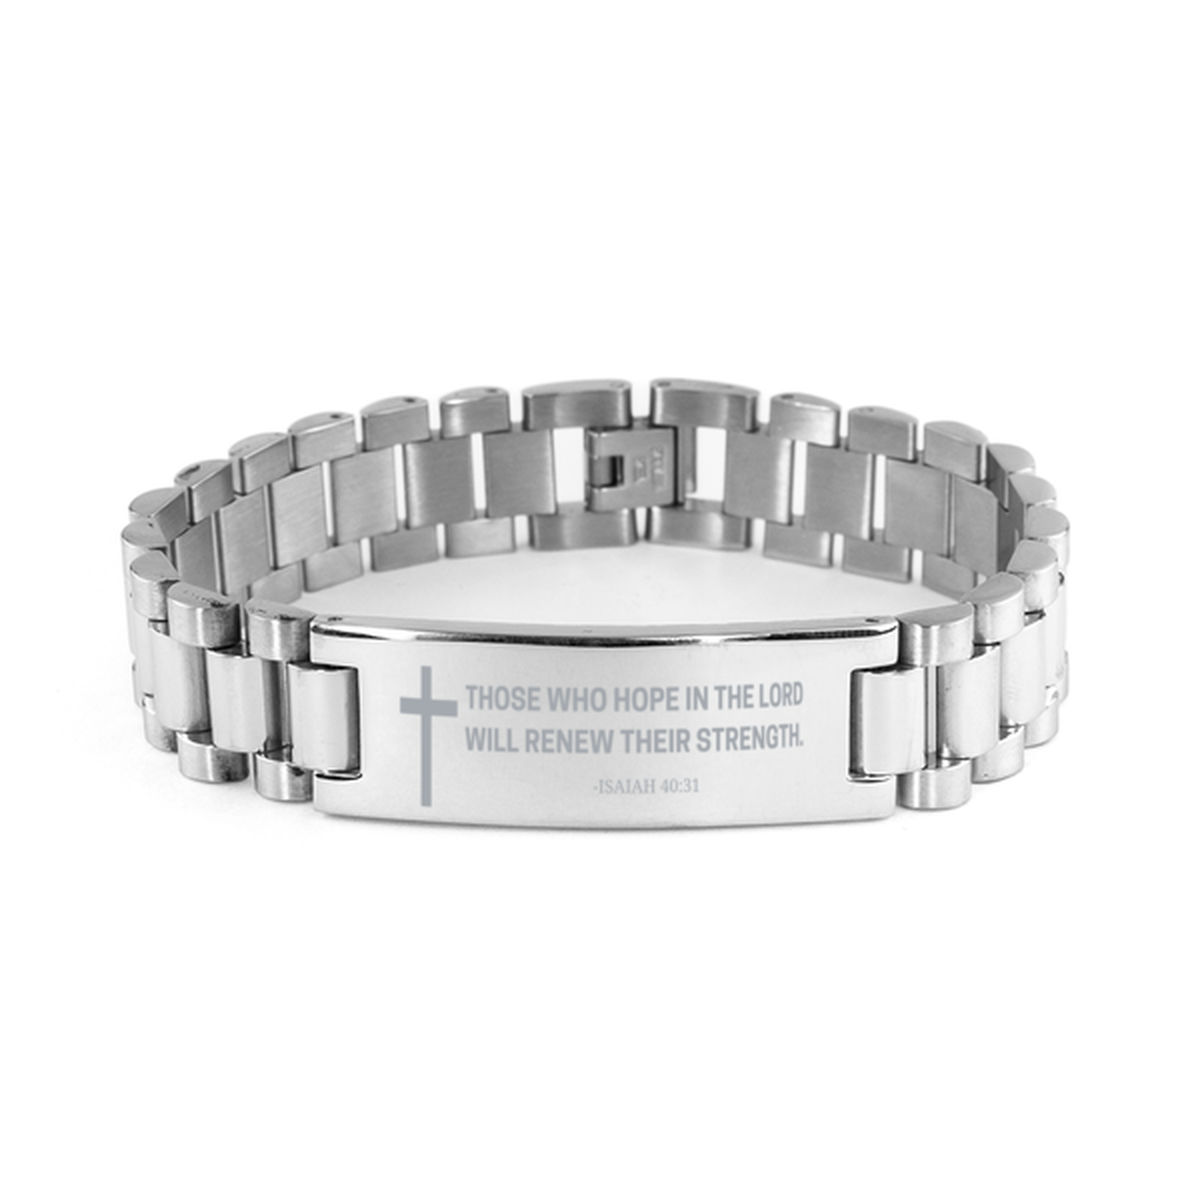 Baptism Gifts For Teenage Boys Girls, Christian Bible Verse Ladder Stainless Steel Bracelet, Those who hope in the Lord, Catholic Confirmation Gifts for Son, Godson, Grandson, Nephew